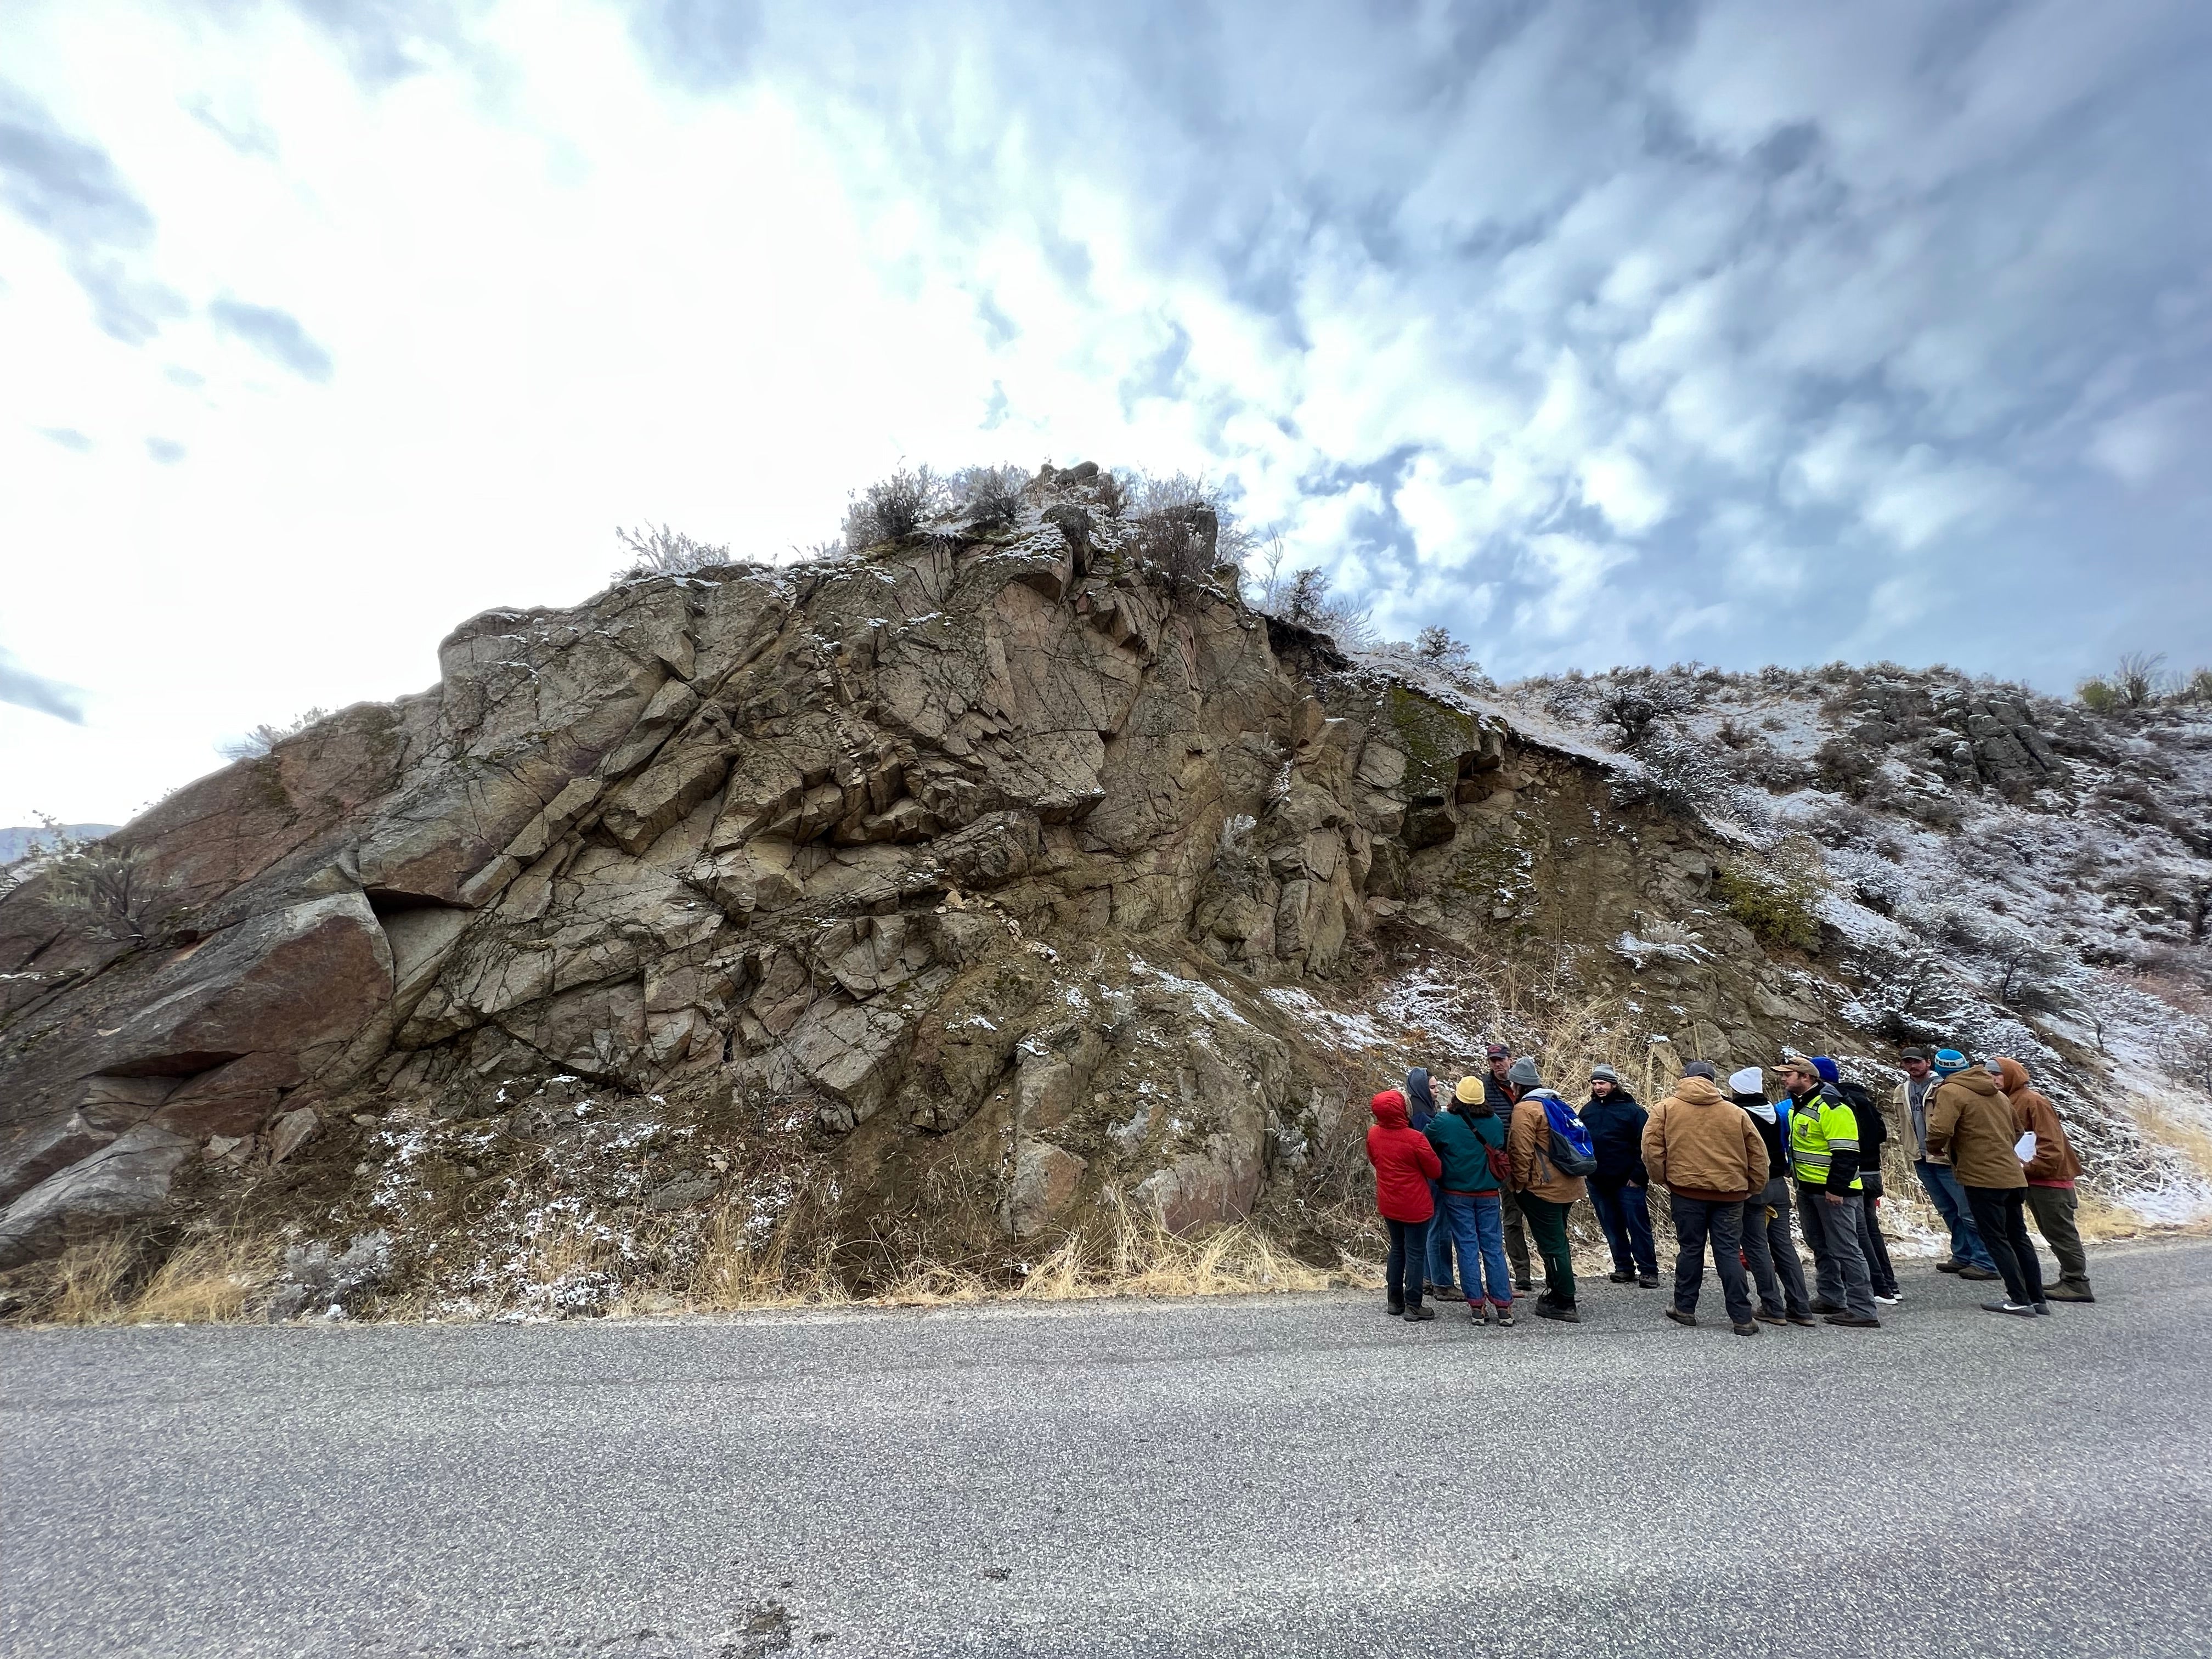 group of people standing on road in front of large rocky slope